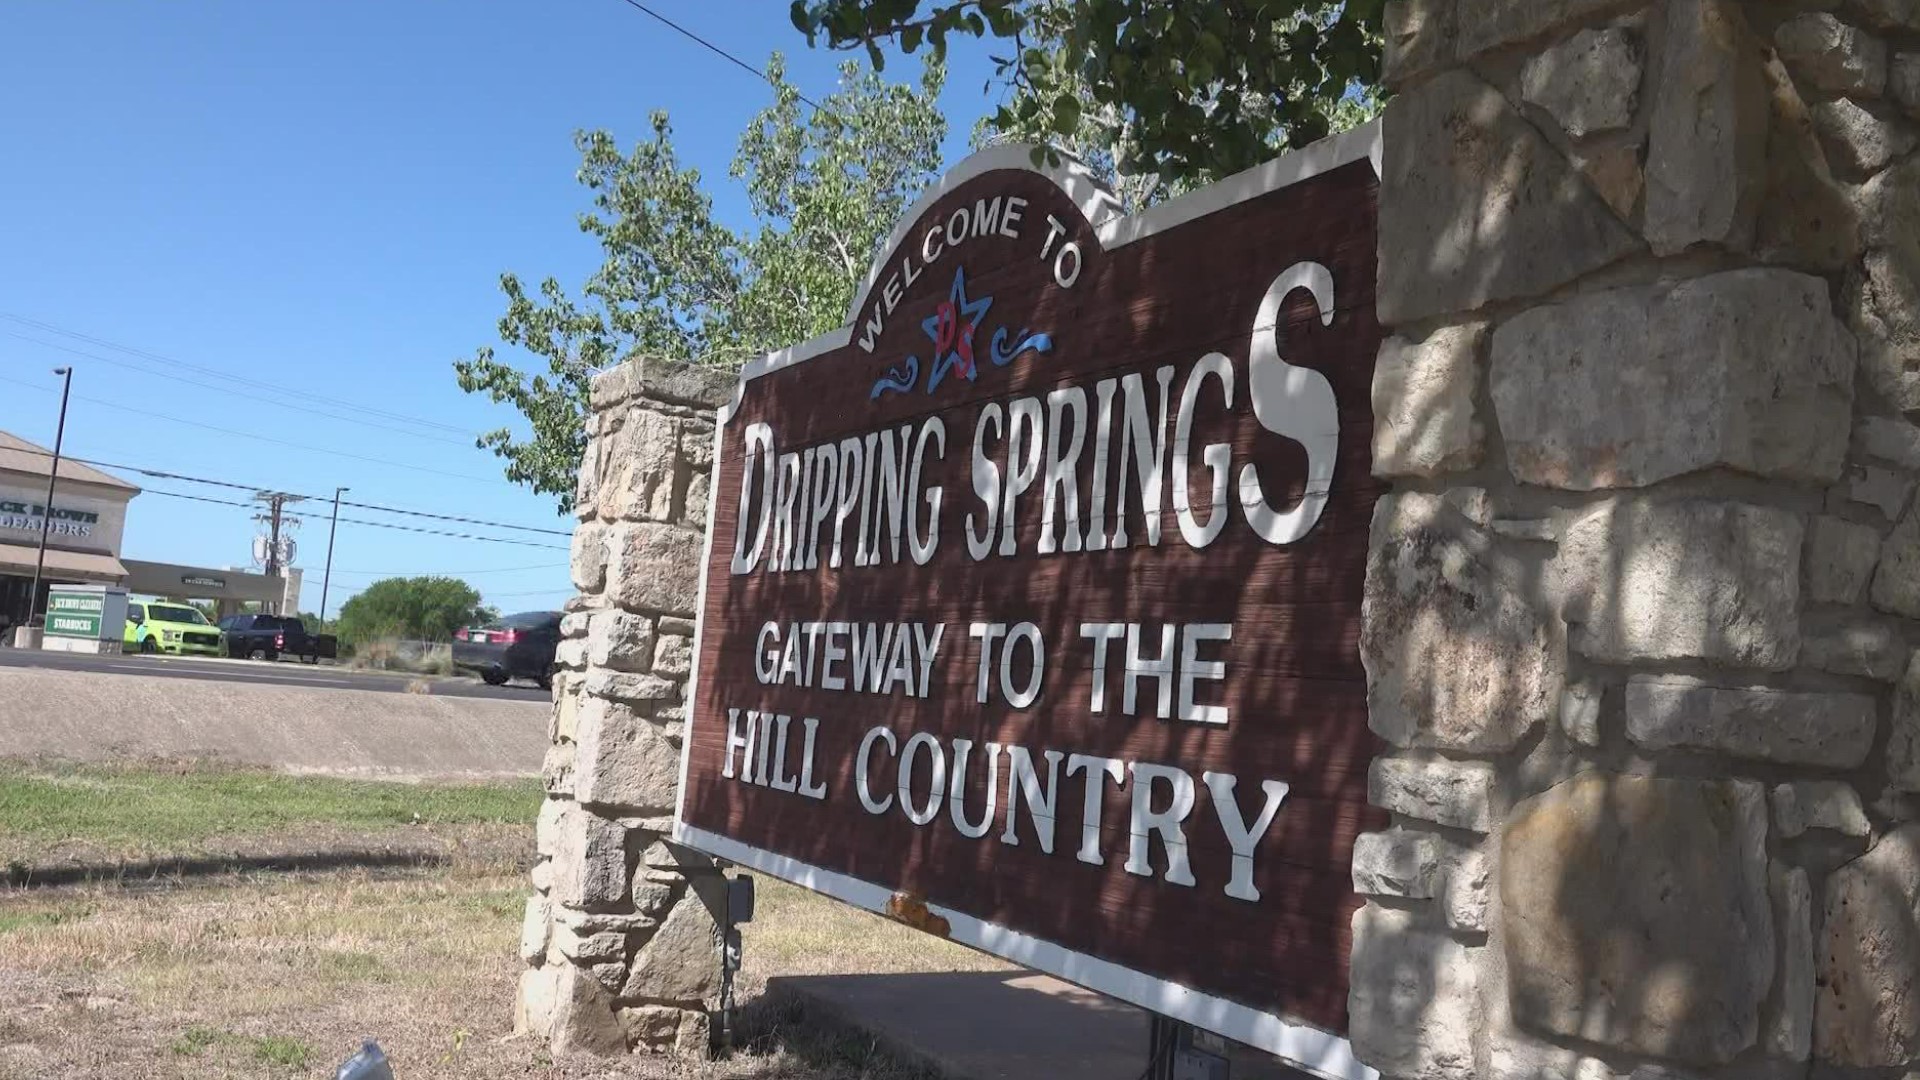 The City of Dripping Springs created a building moratorium in 2021 and has extended it several times. It's currently set to expire in September.